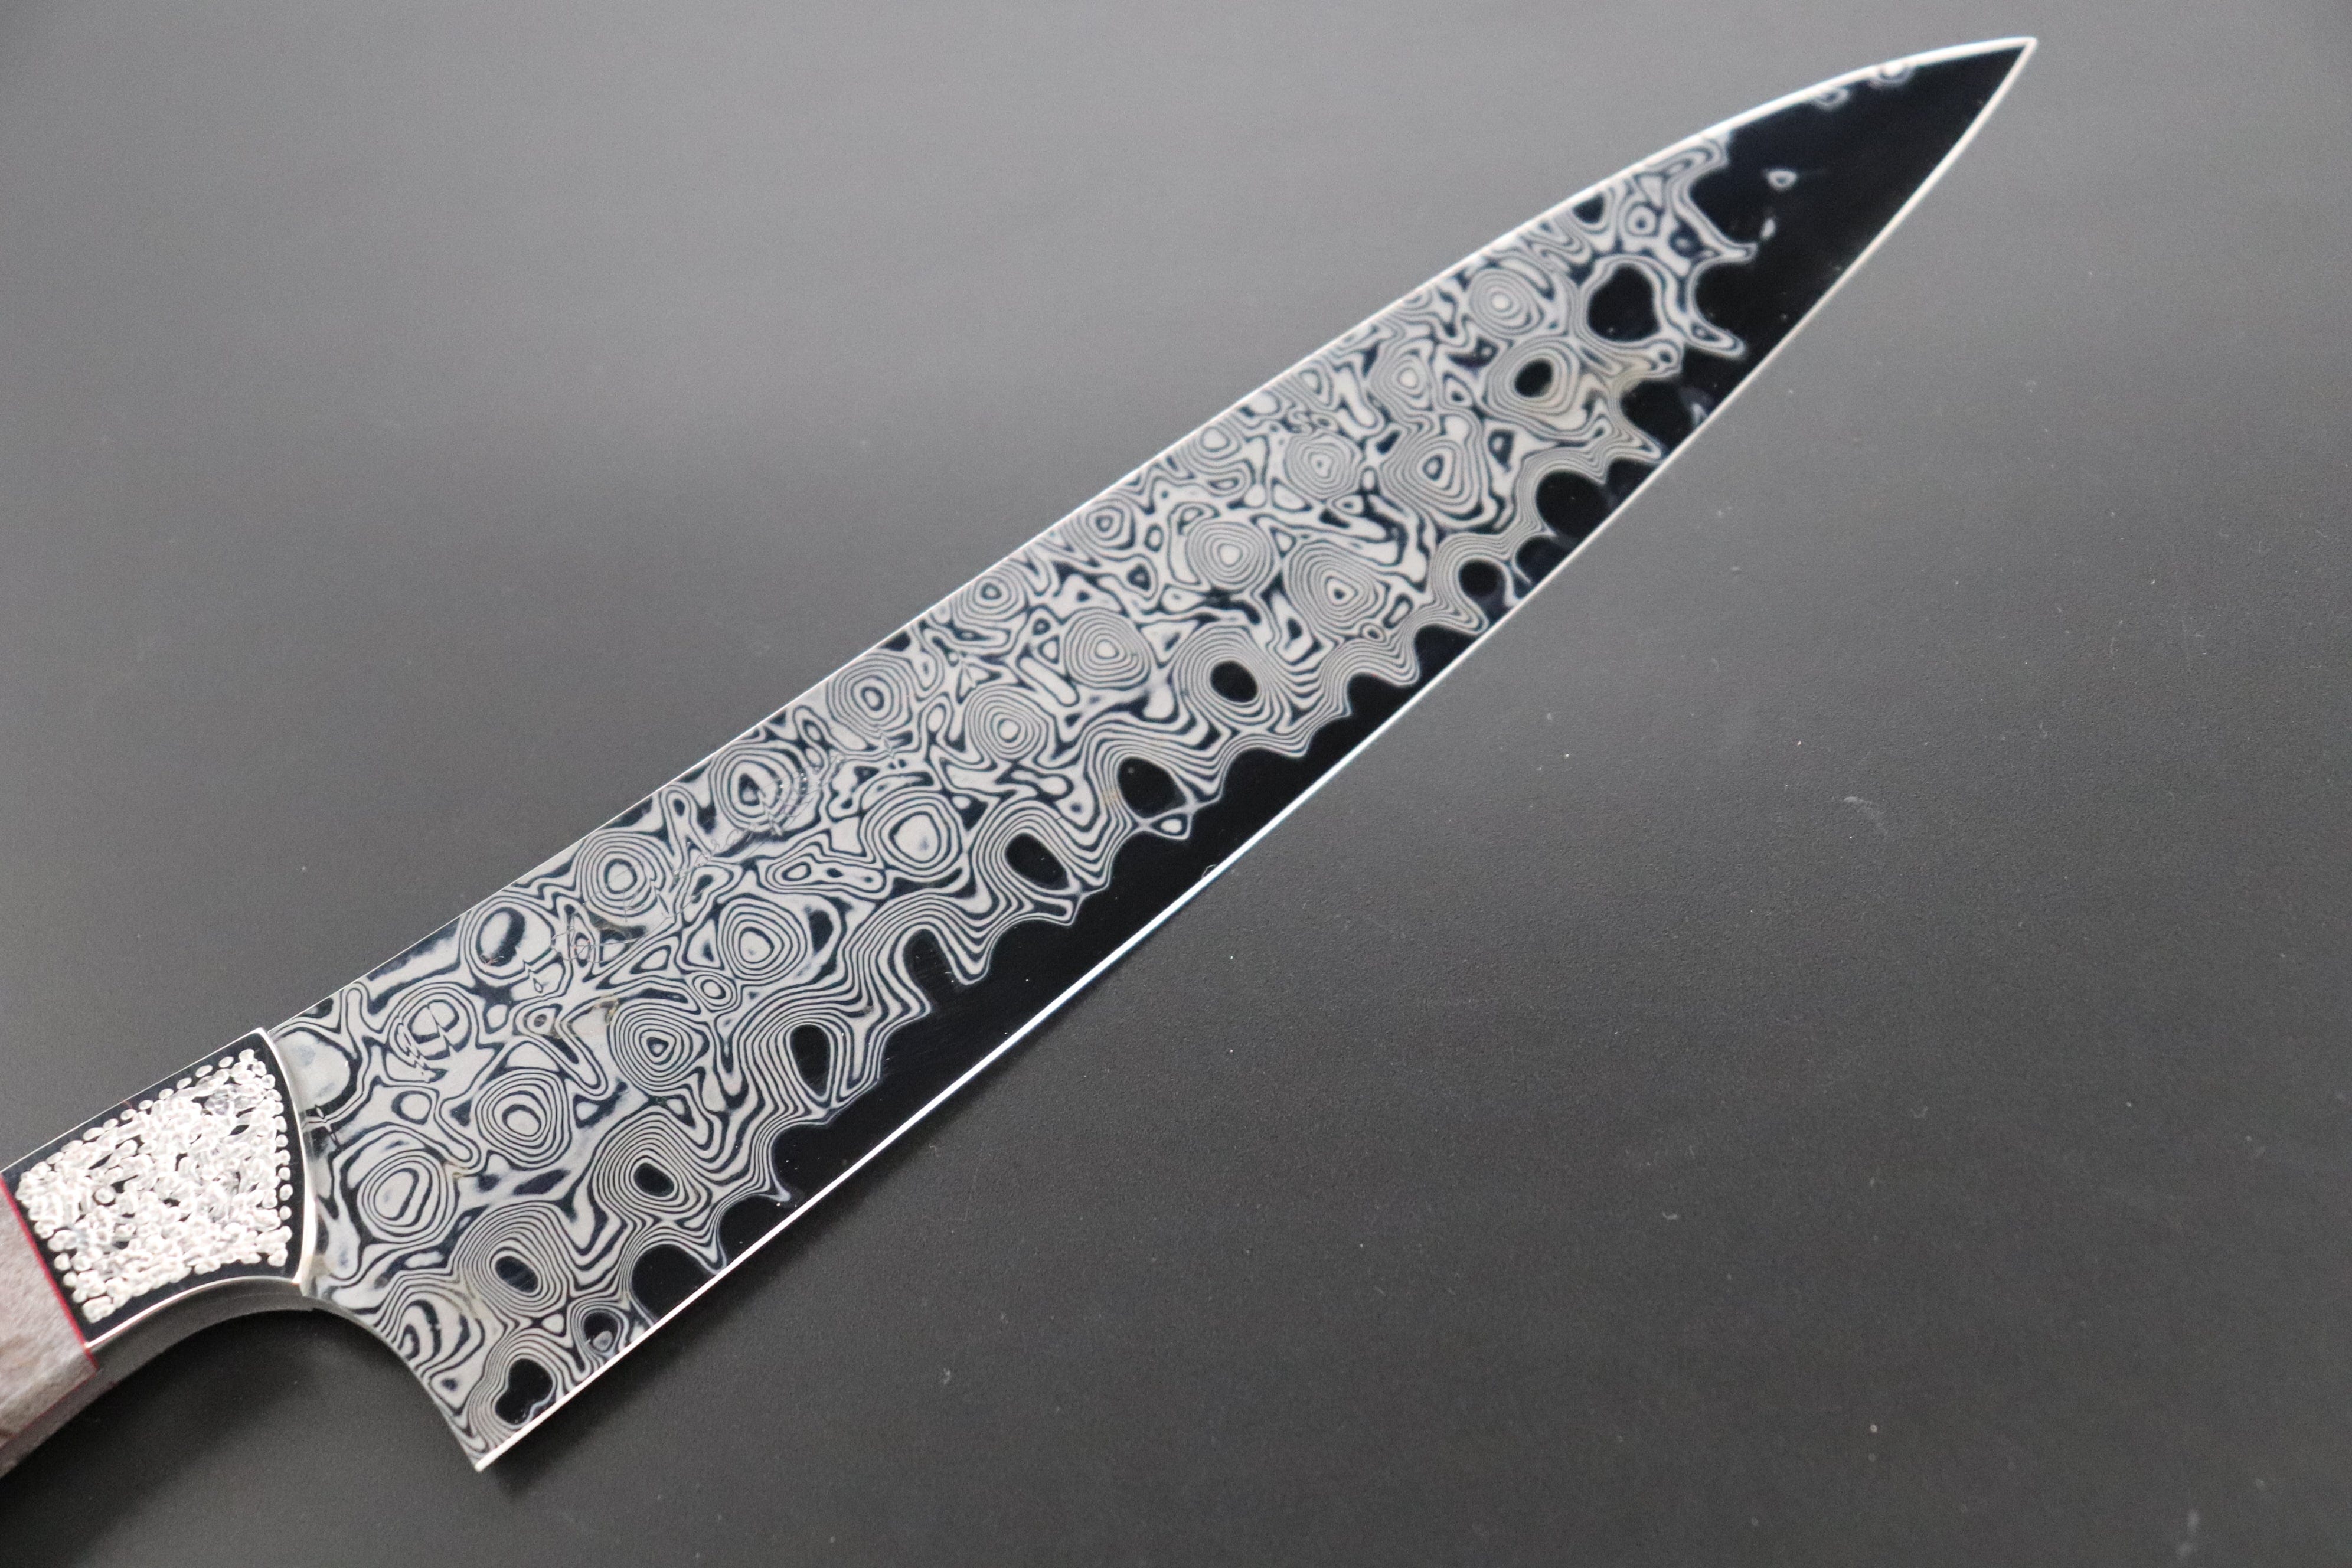  Global G-2-8 Chef's Knife with Custom Engraving